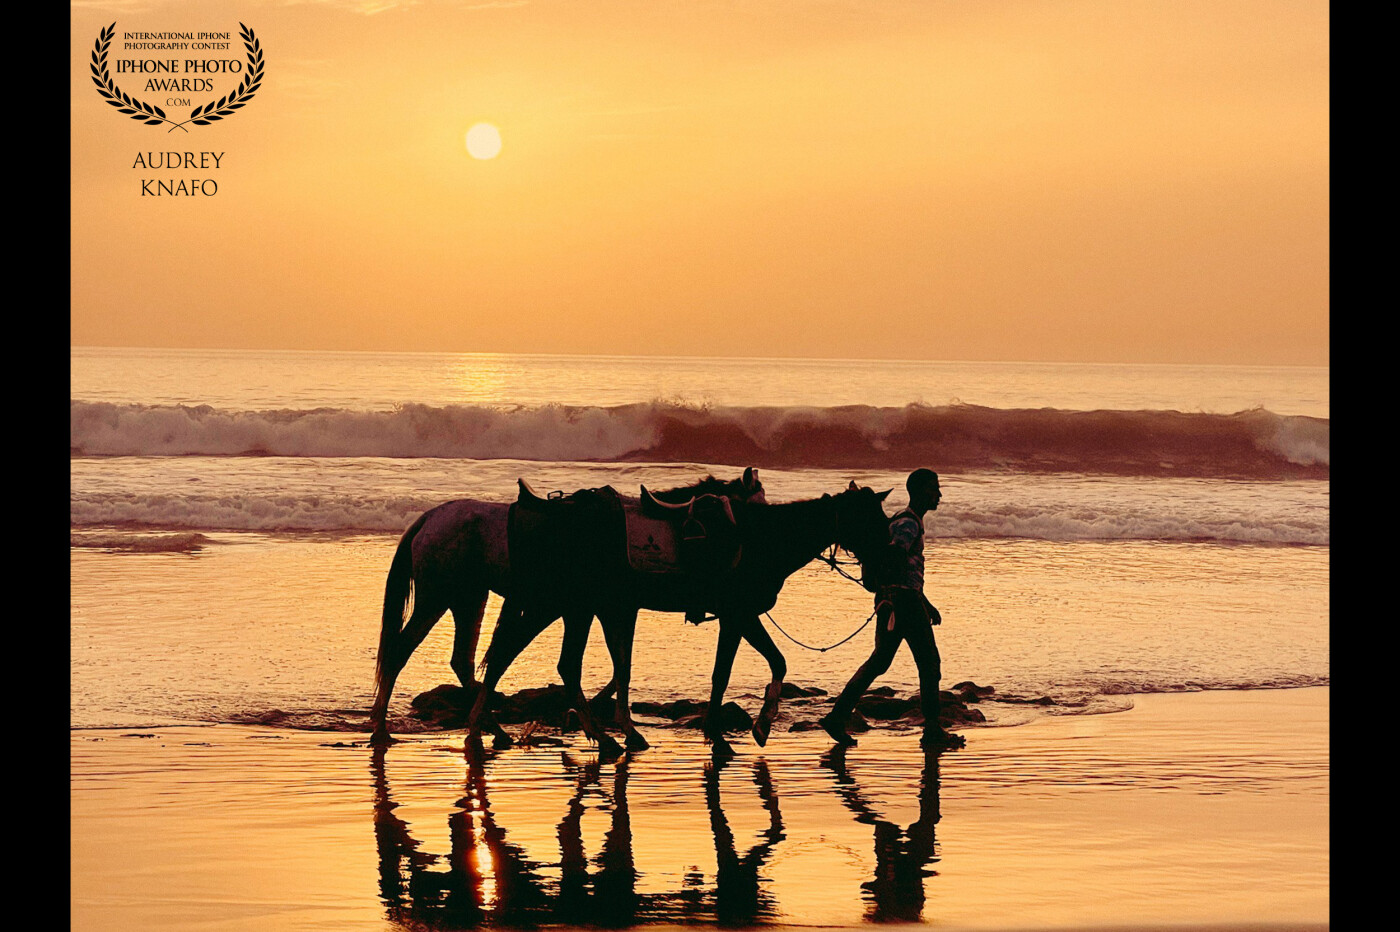 Taghazout Beach ,  in south morocco <br />
Sunset Time , Incredible light <br />
Horses walking along the beach <br />
Perfect for an award ;))